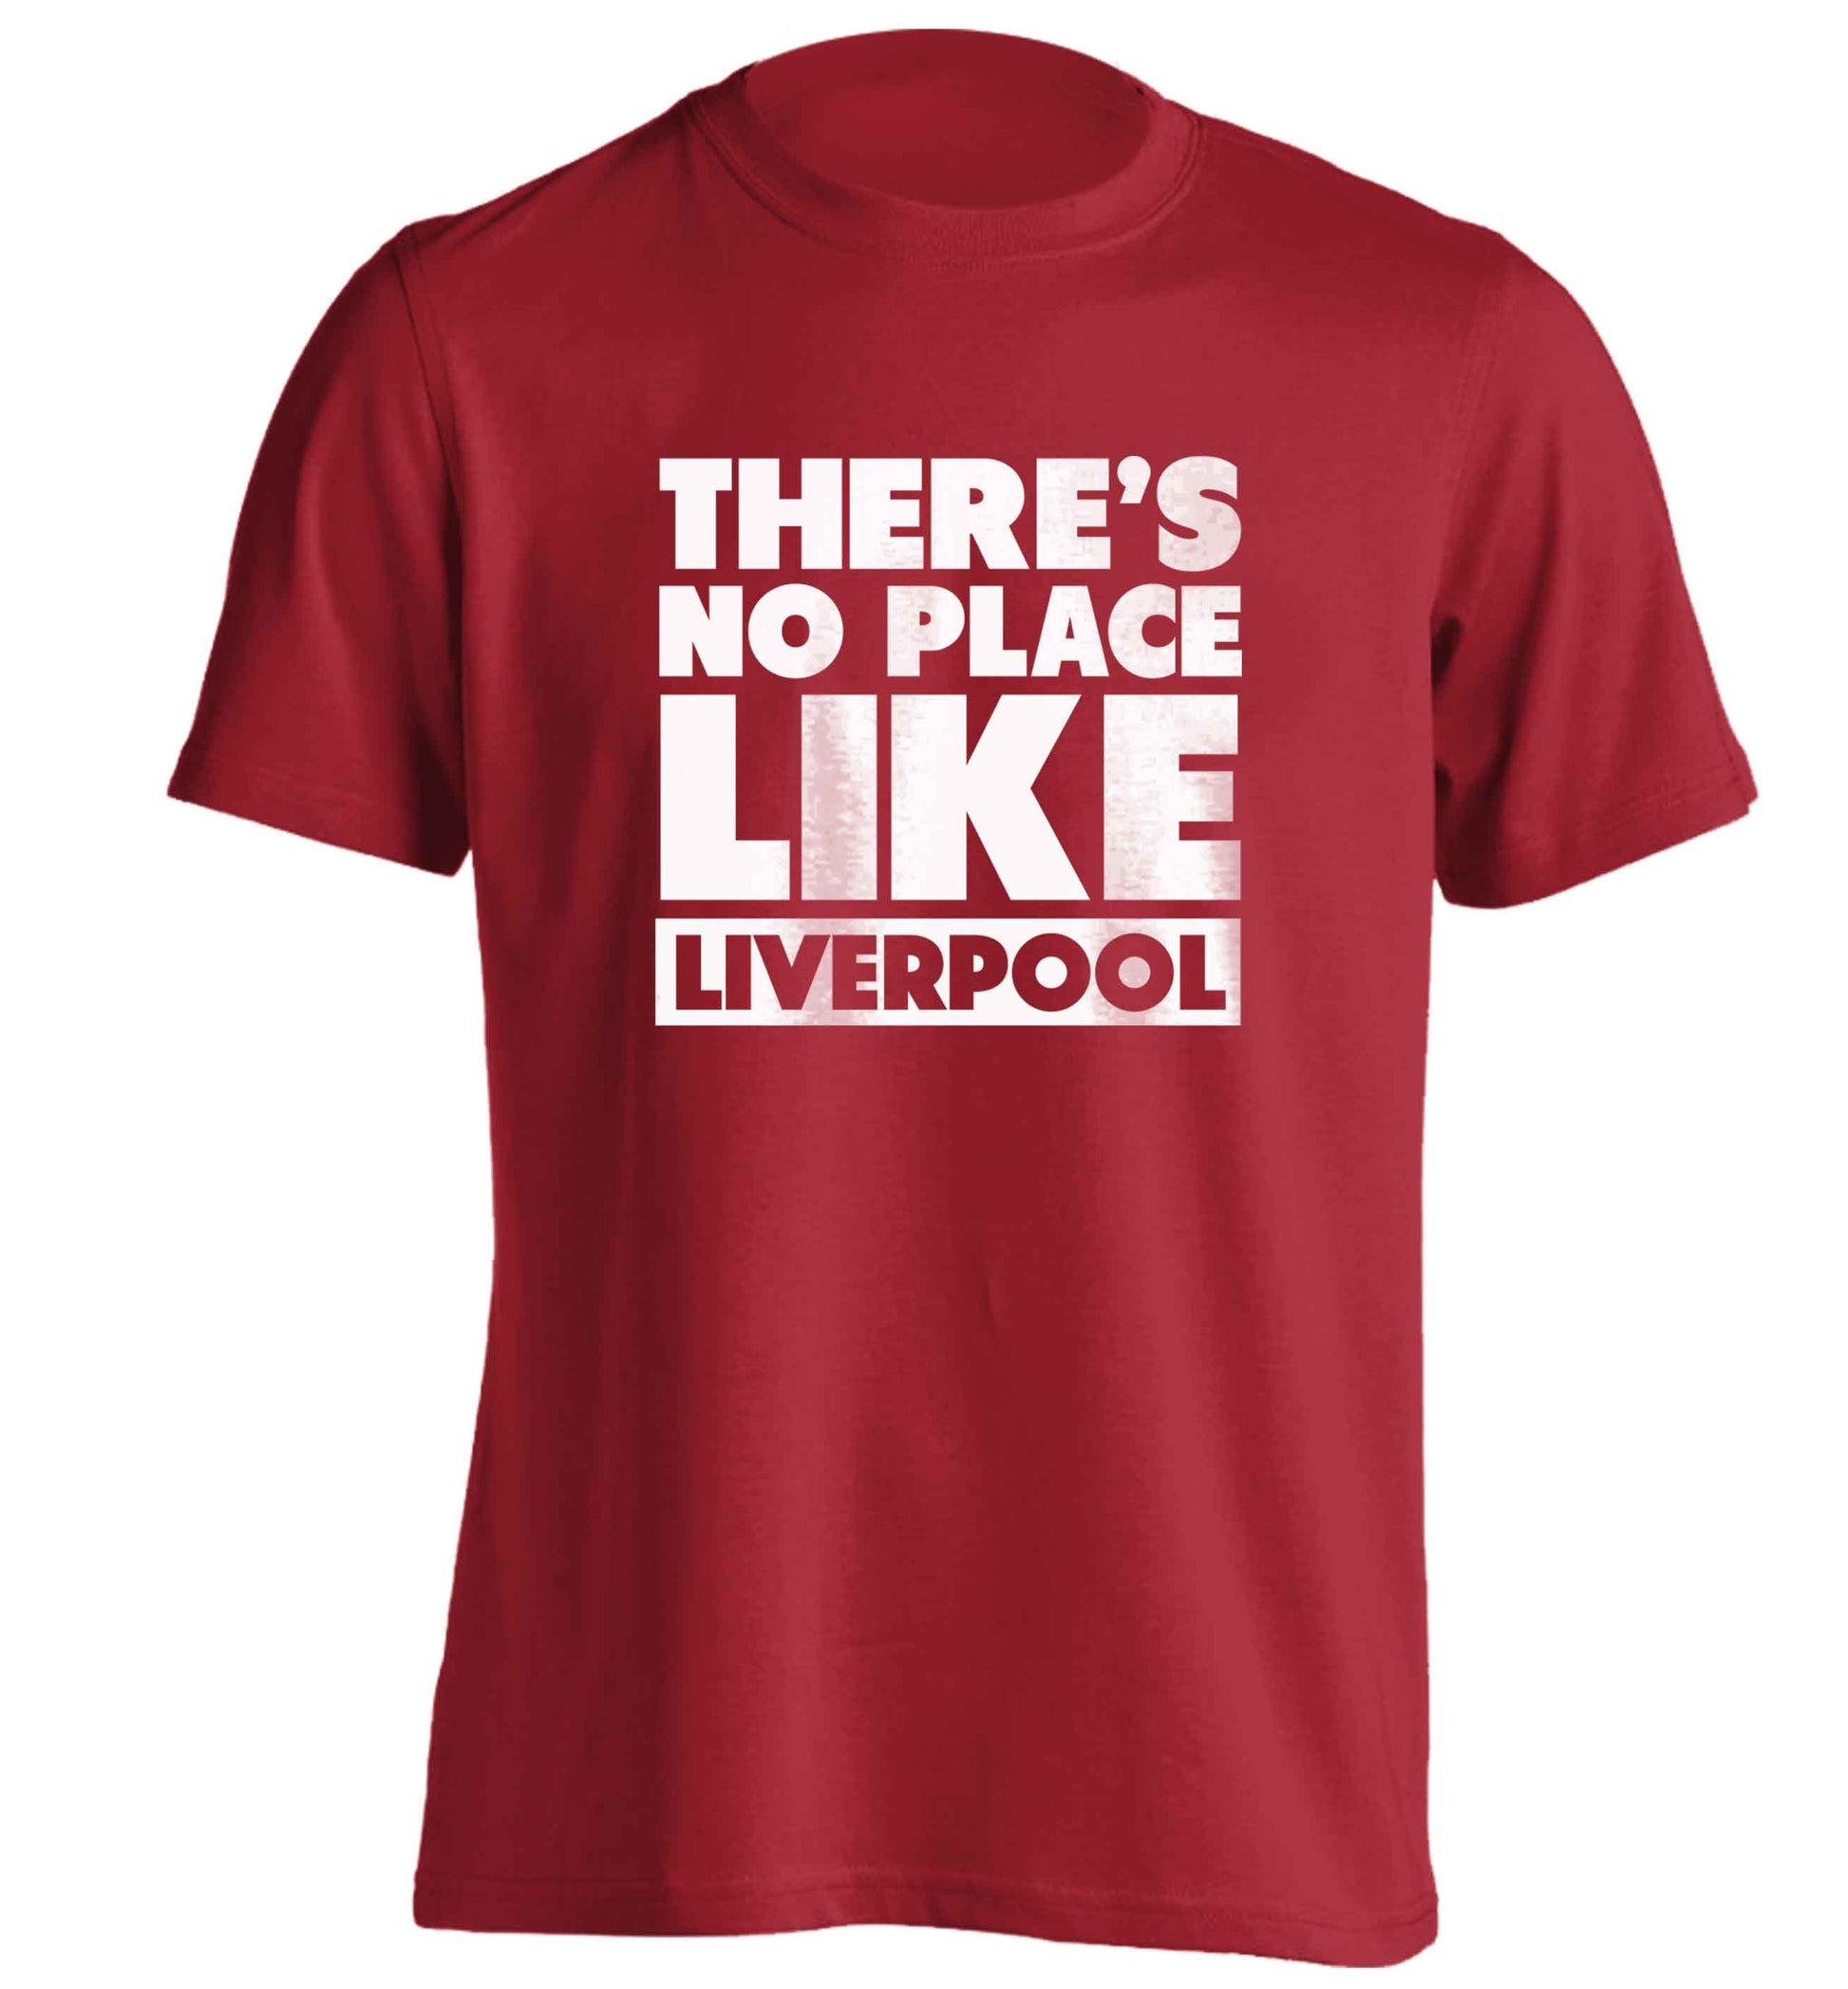 There's no place like Liverpool adults unisex red Tshirt 2XL